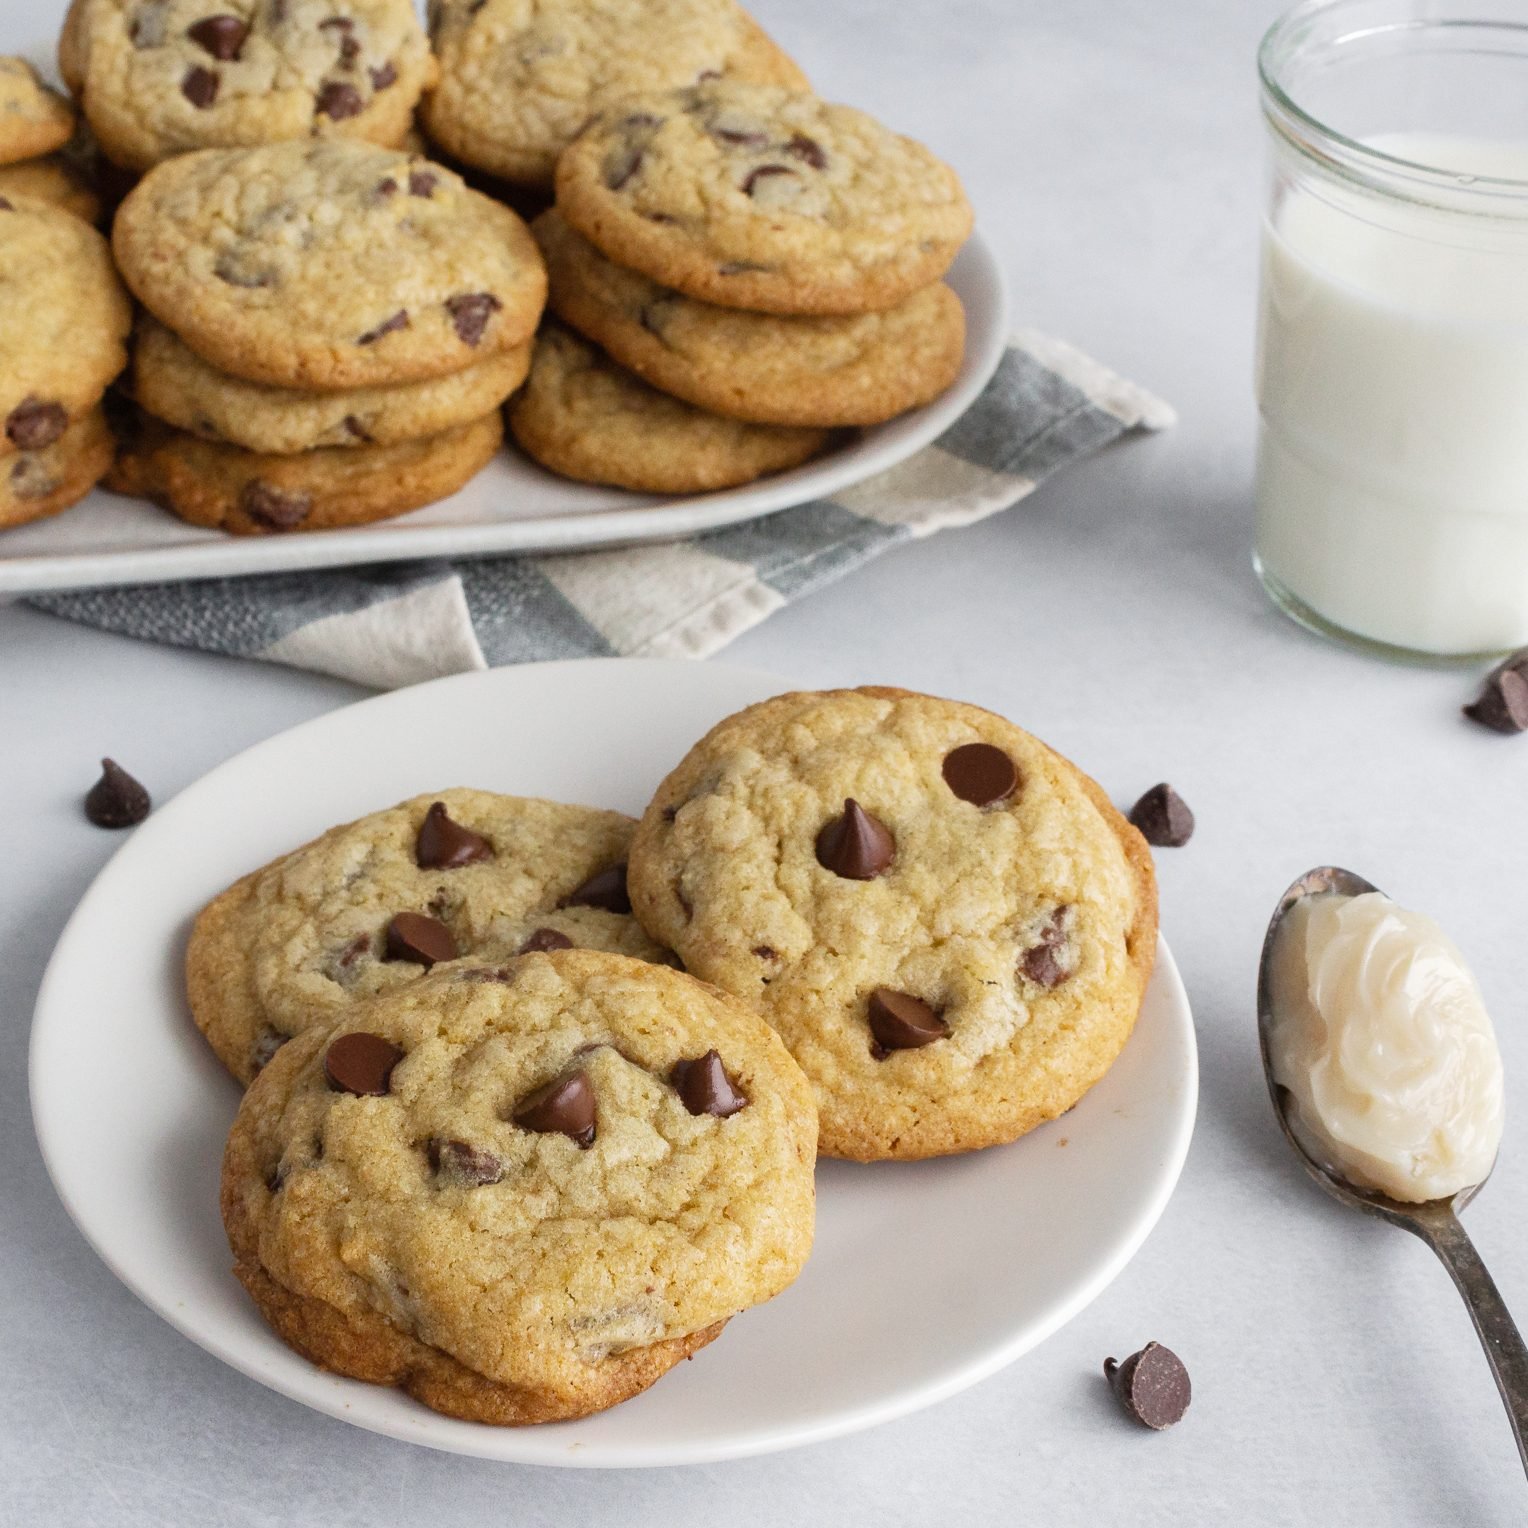 https://www.tasteofhome.com/wp-content/uploads/2022/01/Chocolate-Chip-Cookies-with-Bacon-Grease.TOH_.Nancy-Mock-9-SQ.jpg